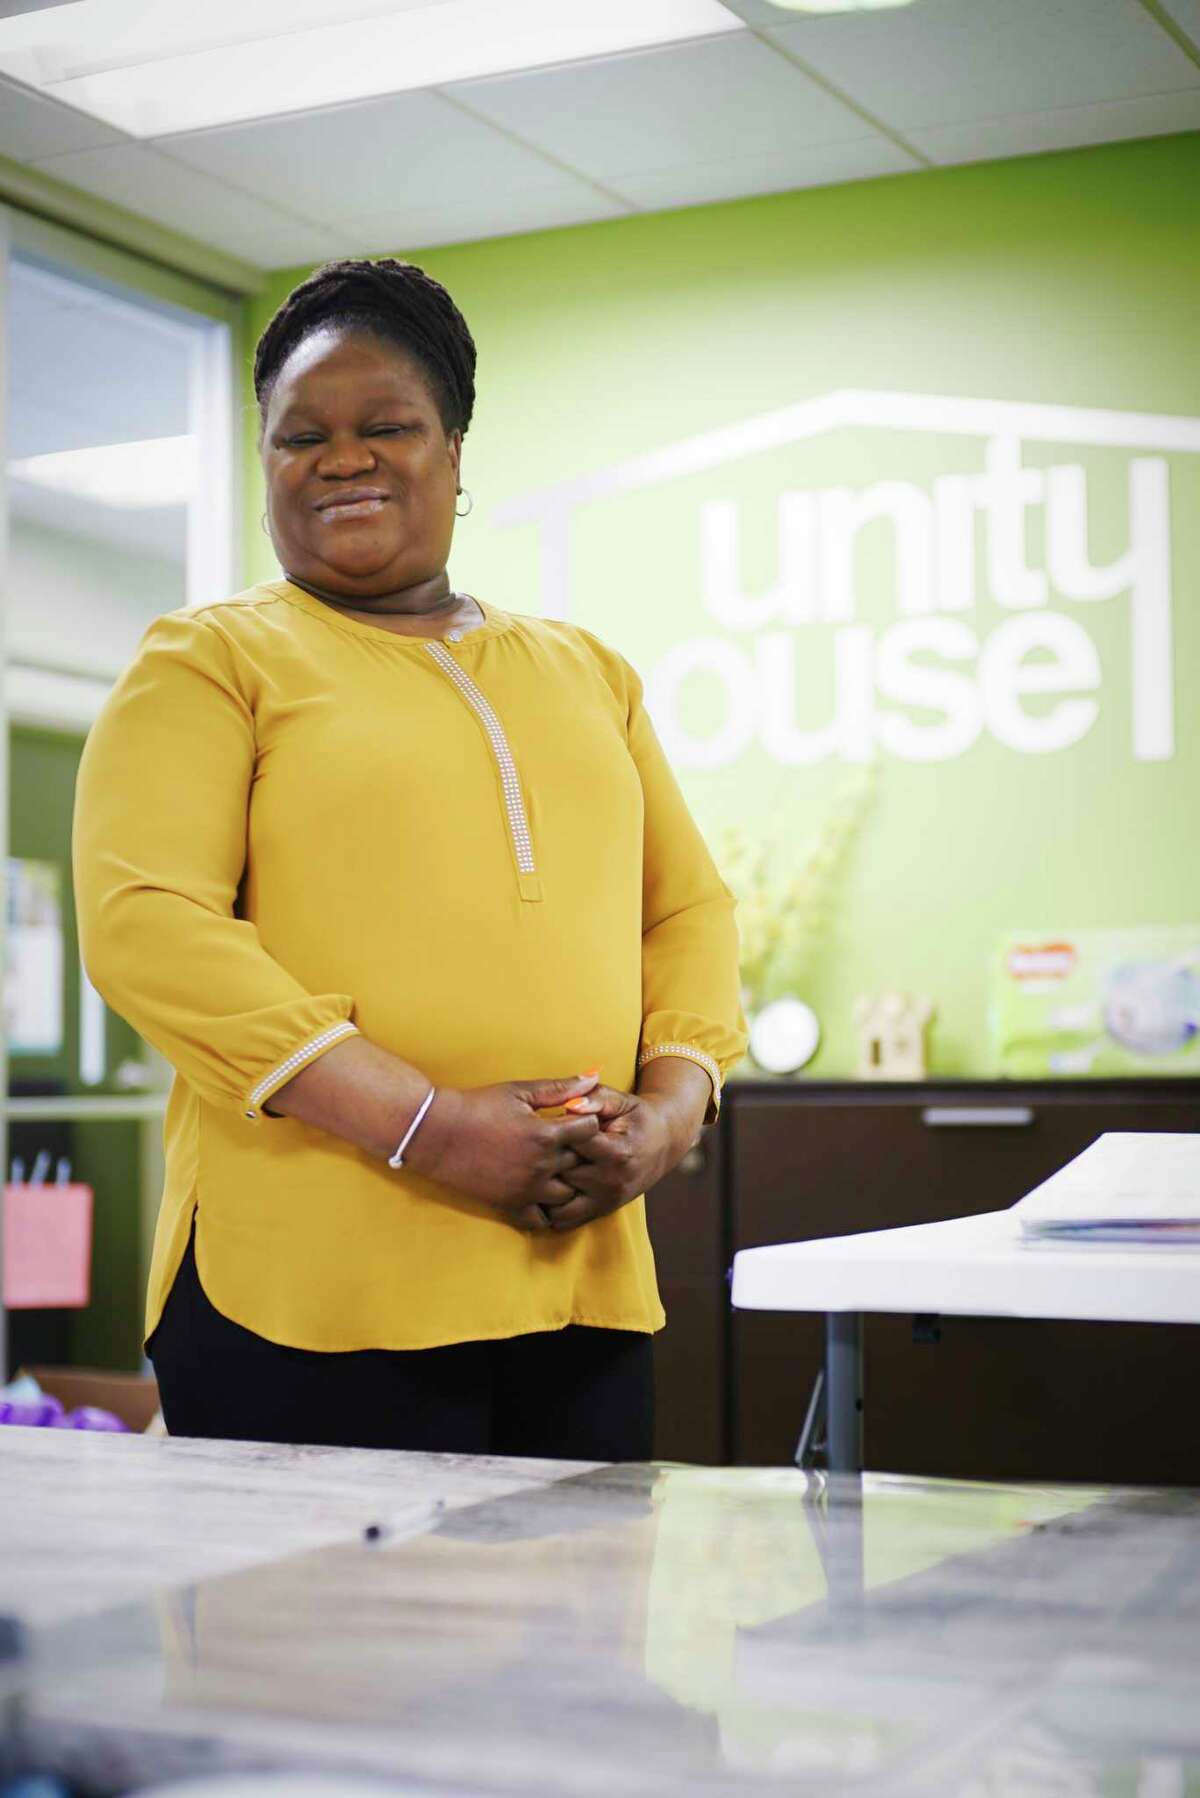 Pauline Glenn, a receptionist at Unity House poses for a photo at the reception desk on Wednesday, April 15, 2020, in Troy, N.Y. (Paul Buckowski/Times Union)